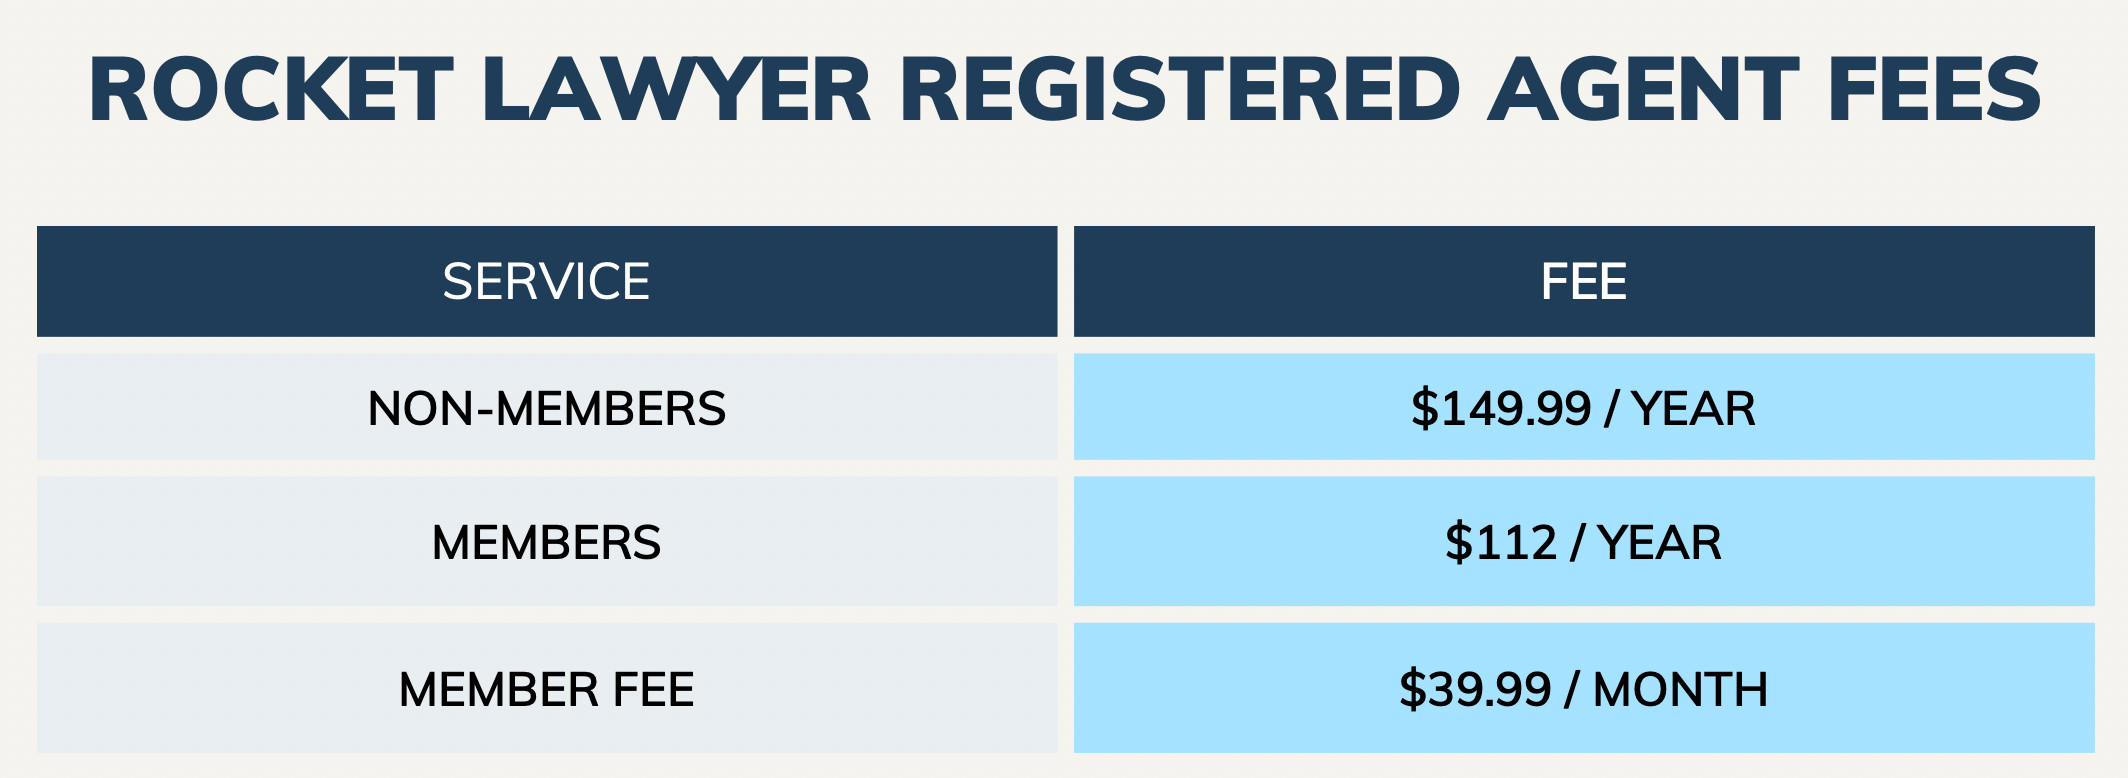 rocket lawyer registered agent fees overview